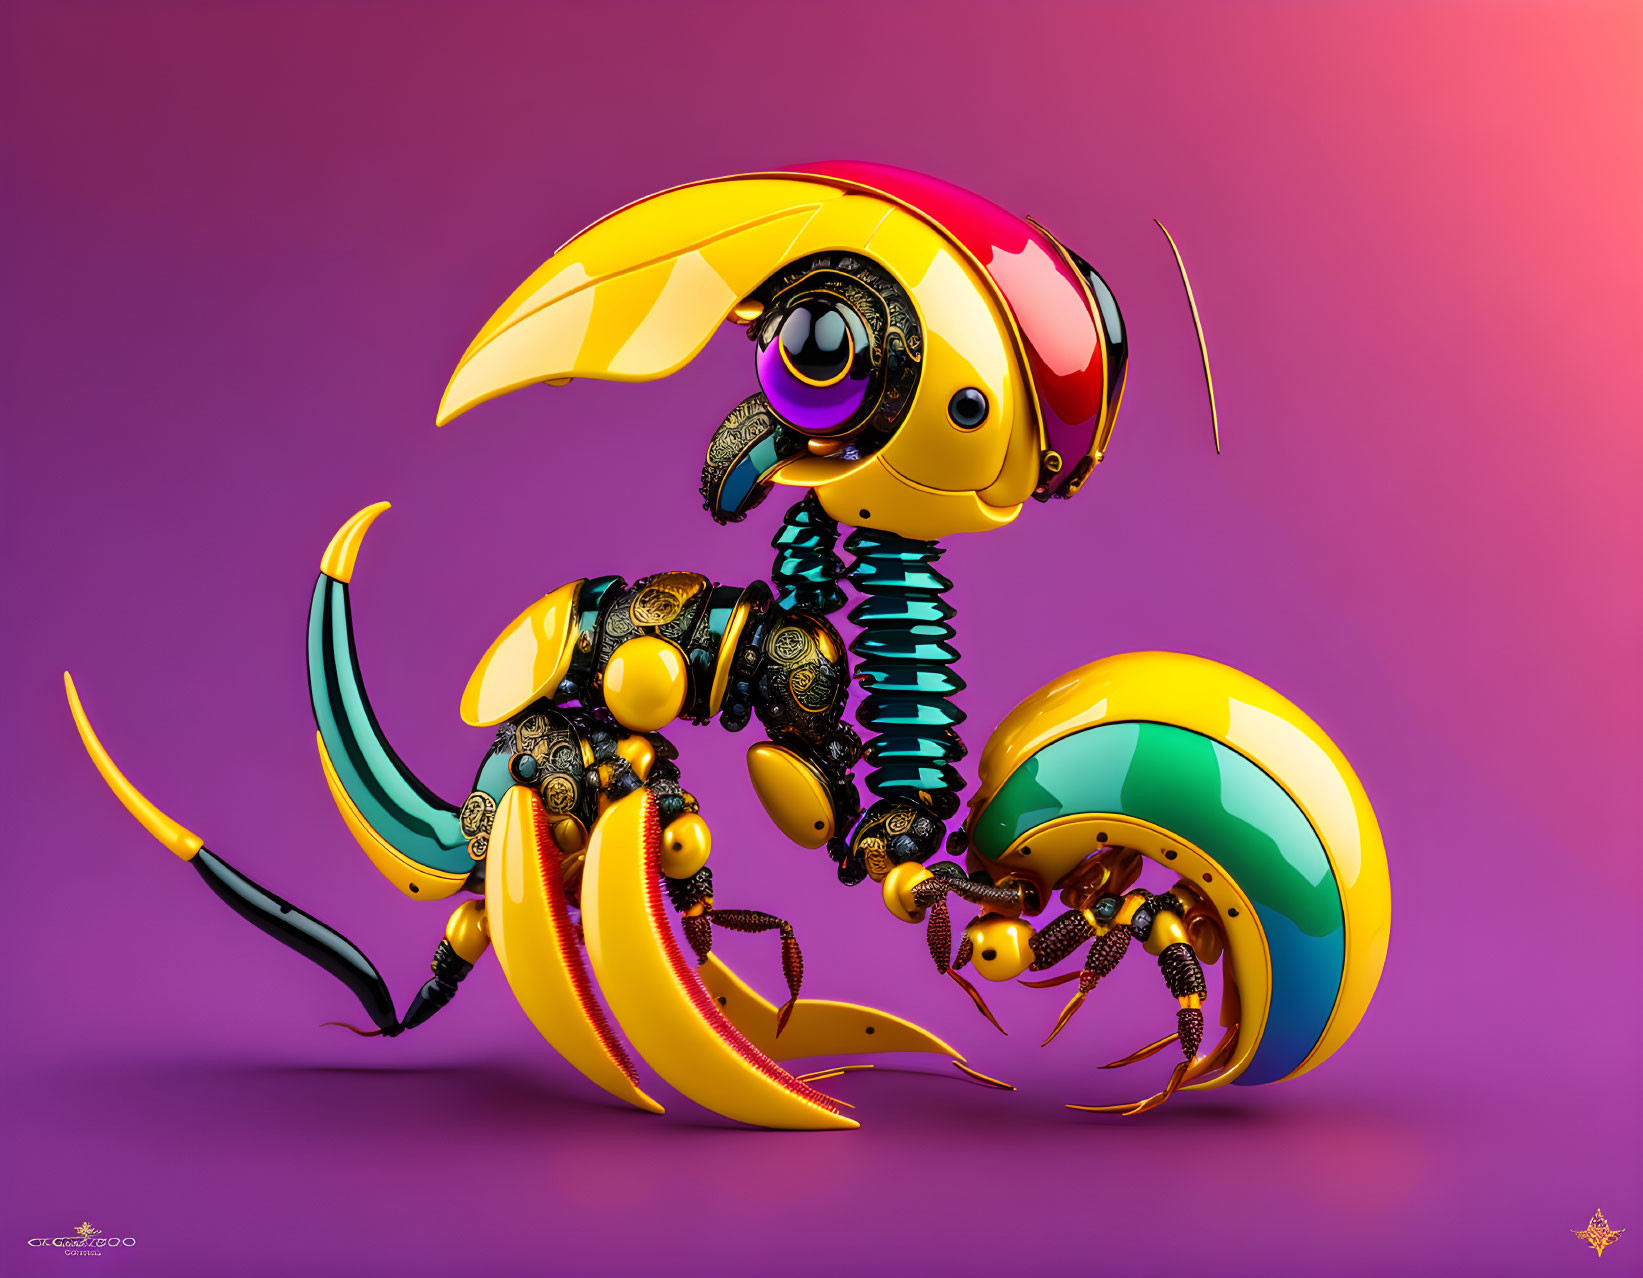 Vibrant Yellow and Pink Mechanical Scorpion on Purple Background